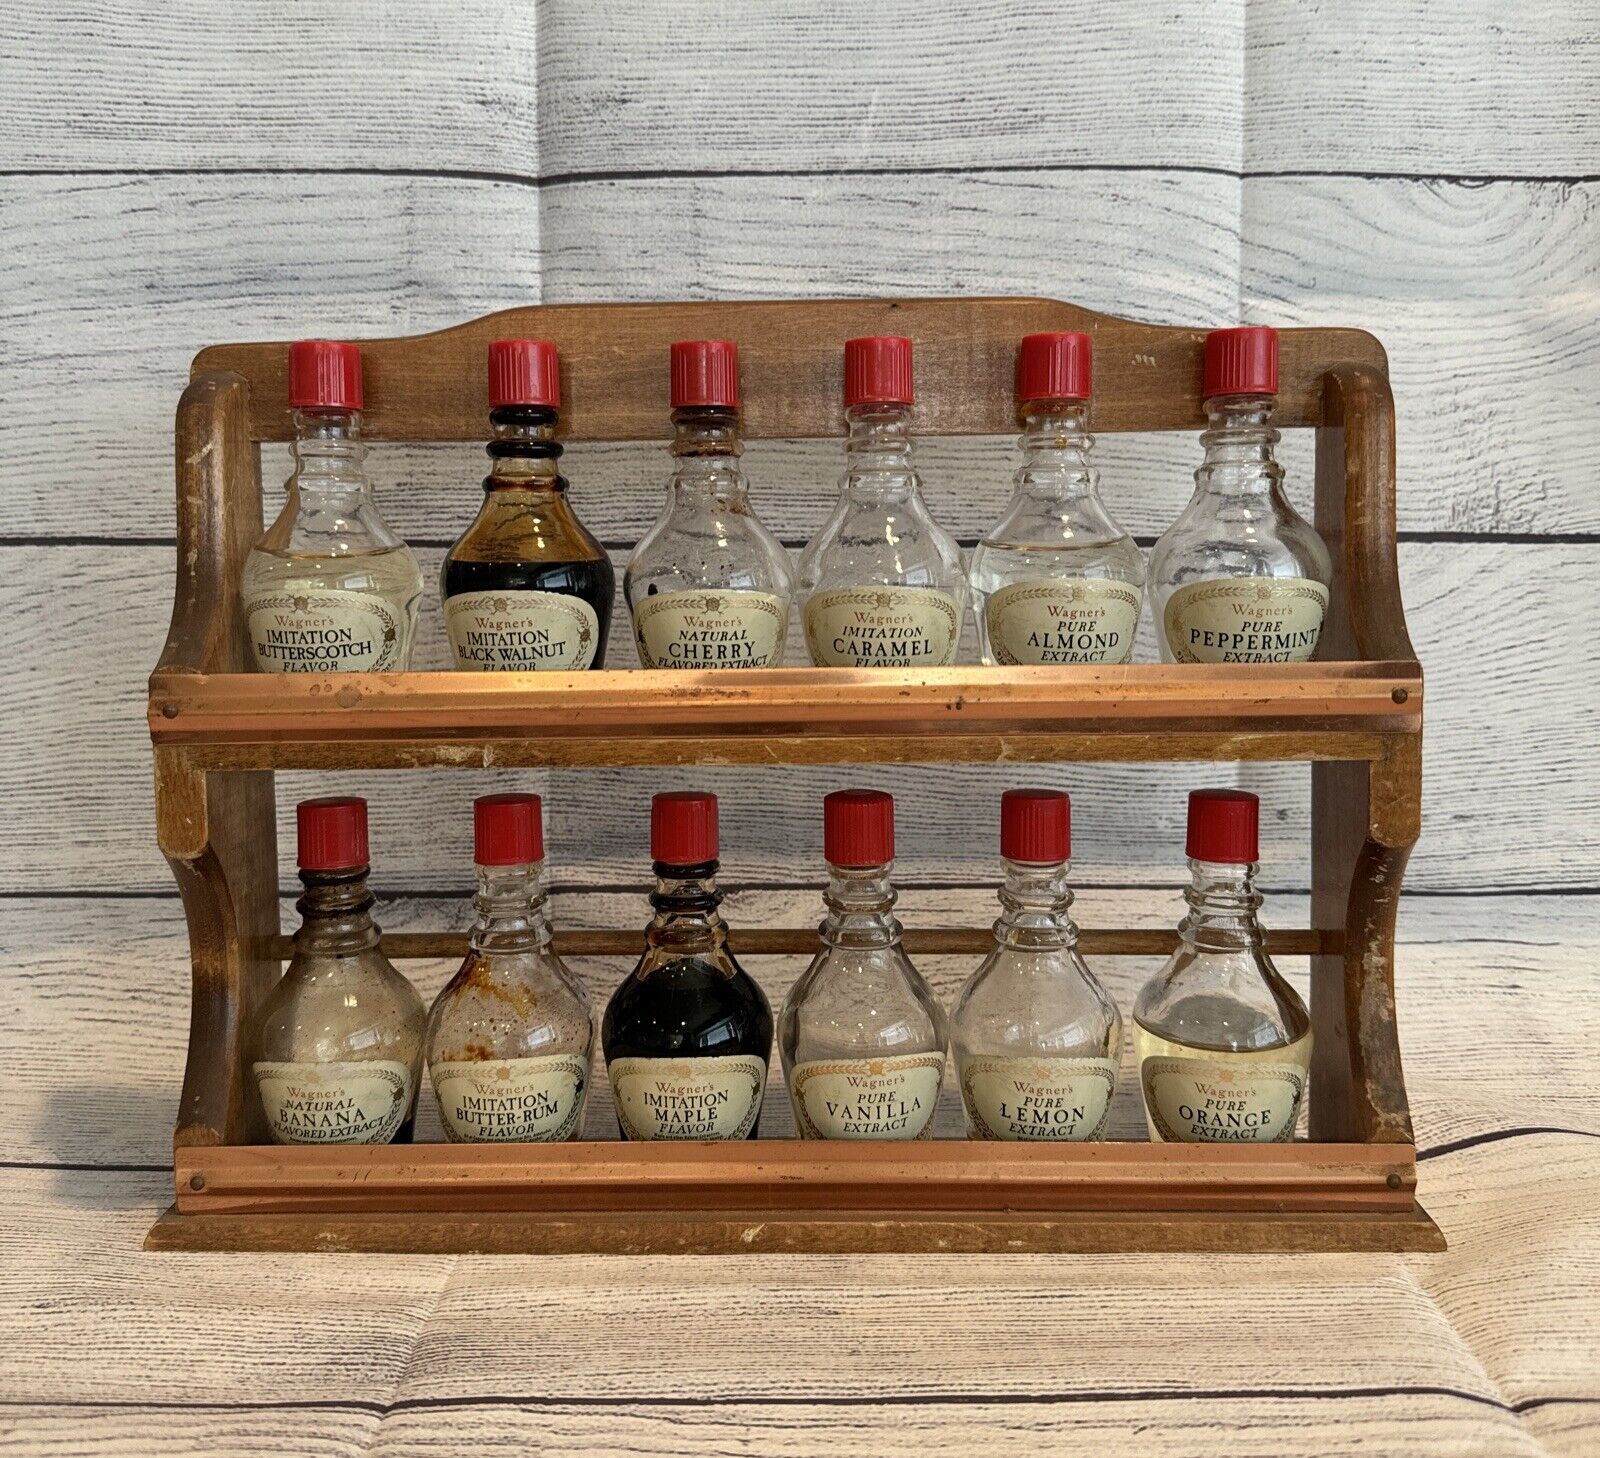 Vintage Wagner’s Extract Spice Rack with Bottles